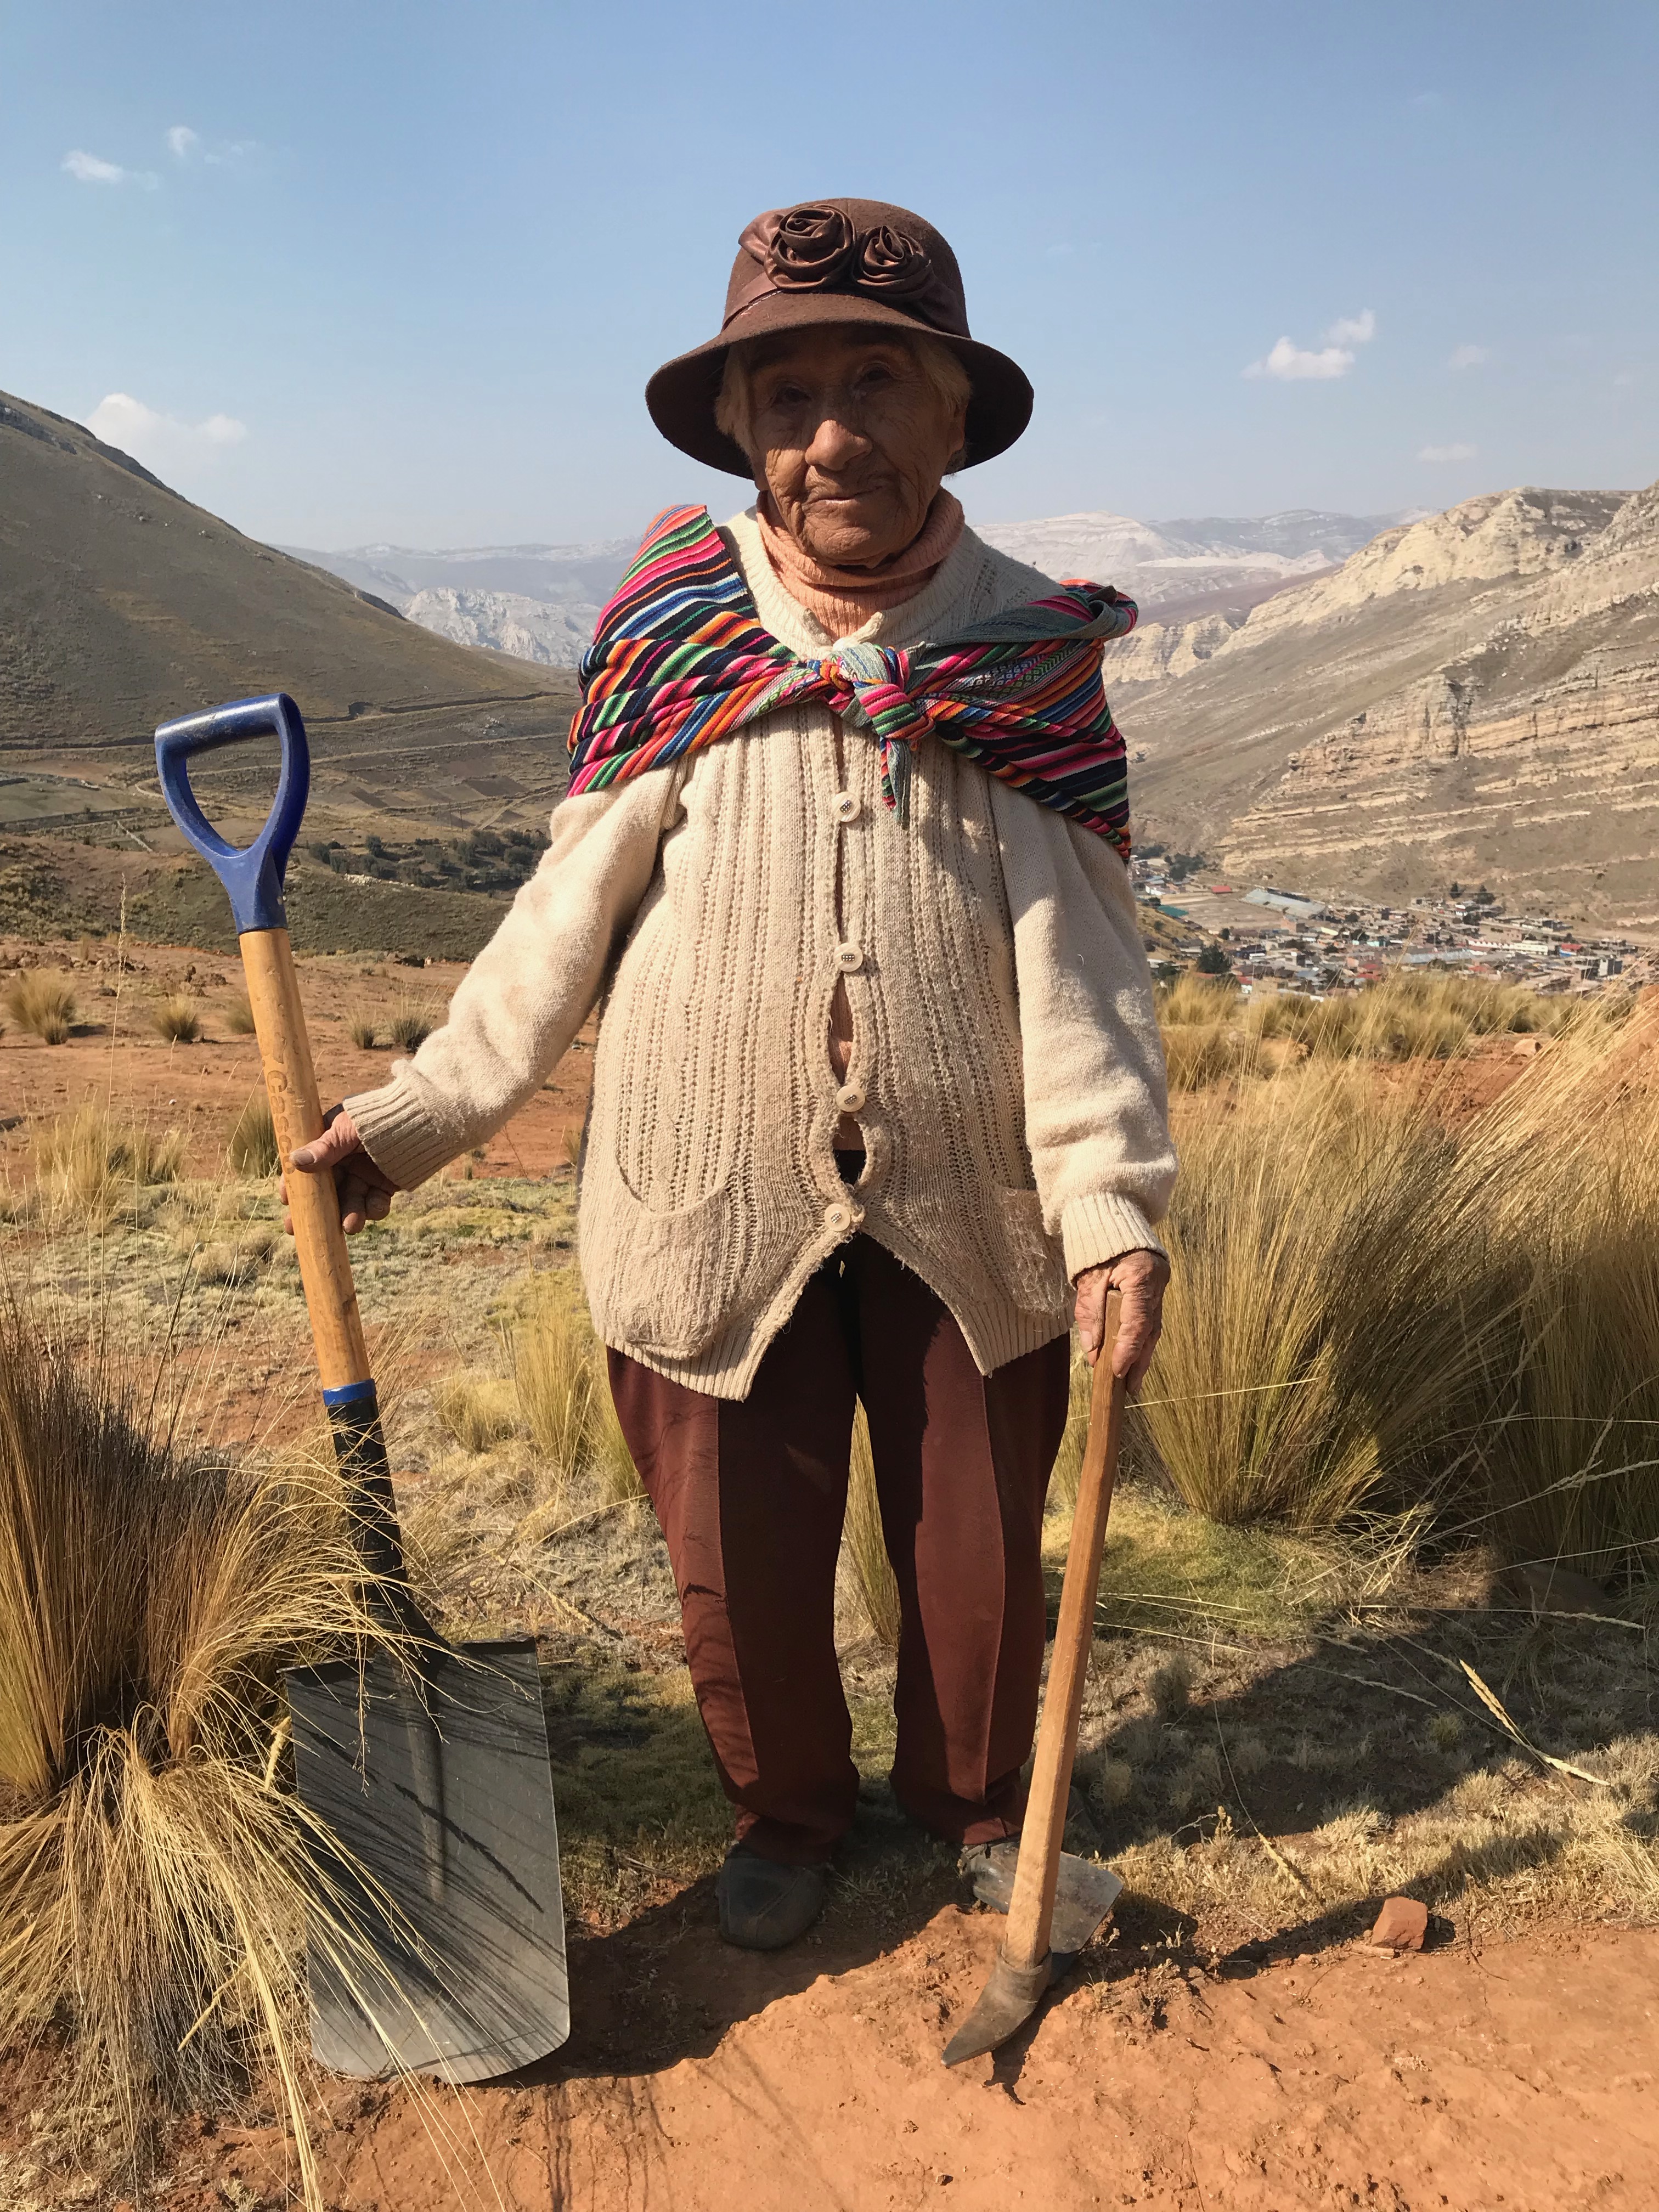 Victoria Trujillo, better known as Mama Toya, stands on the contaminated lands of her beloved Villa El Sol where she has spent the past twenty years planting over 30,000 trees. In the distant background are the mountains of La Oroya, white-washed from acid rain.